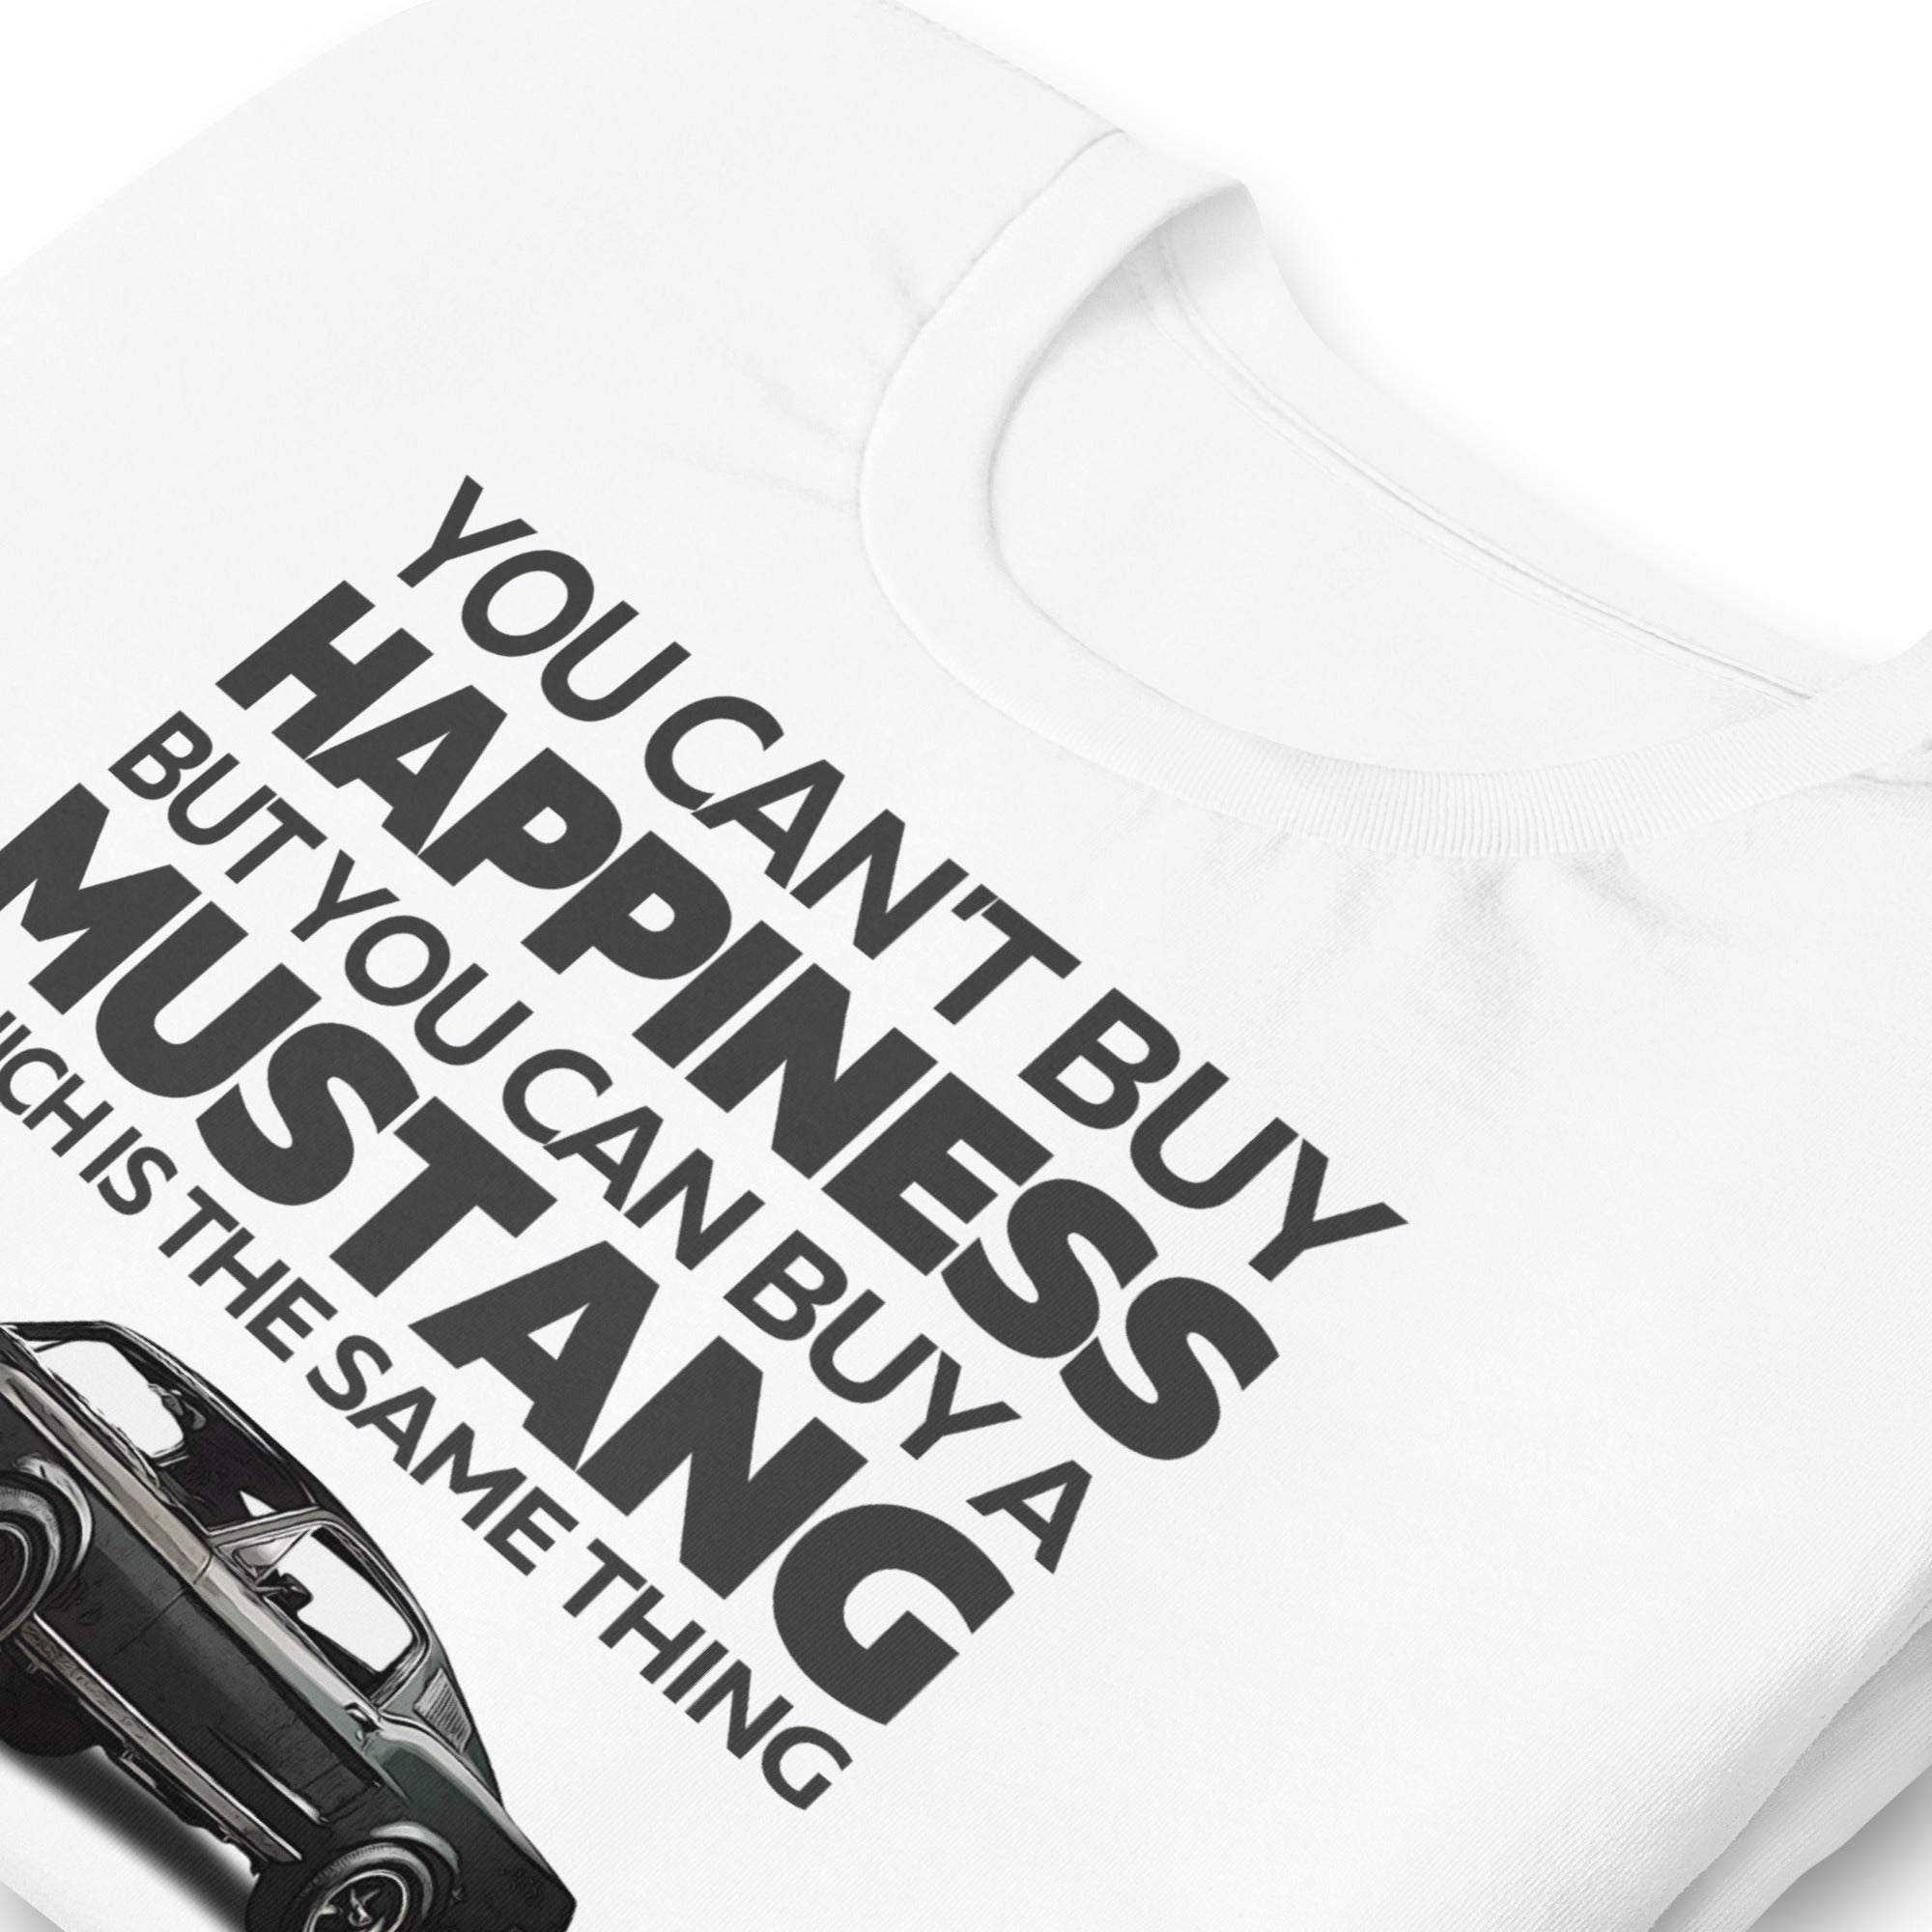 You Can't Buy Happiness - Mustang